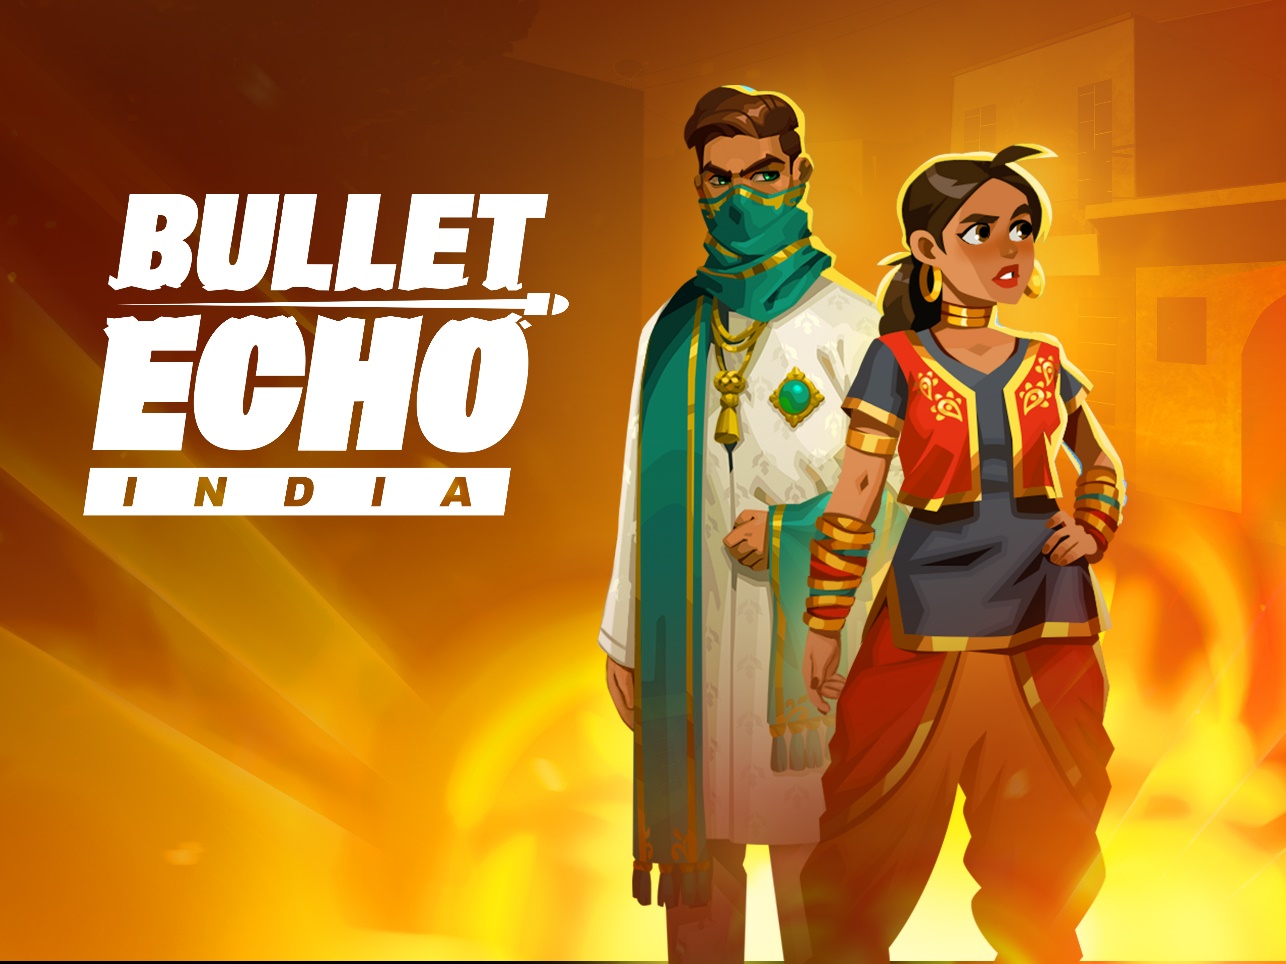 Bullet Echo India scales the Google Play Store charts; KRAFTON and ZeptoLab officially announce the launch of the game in India.